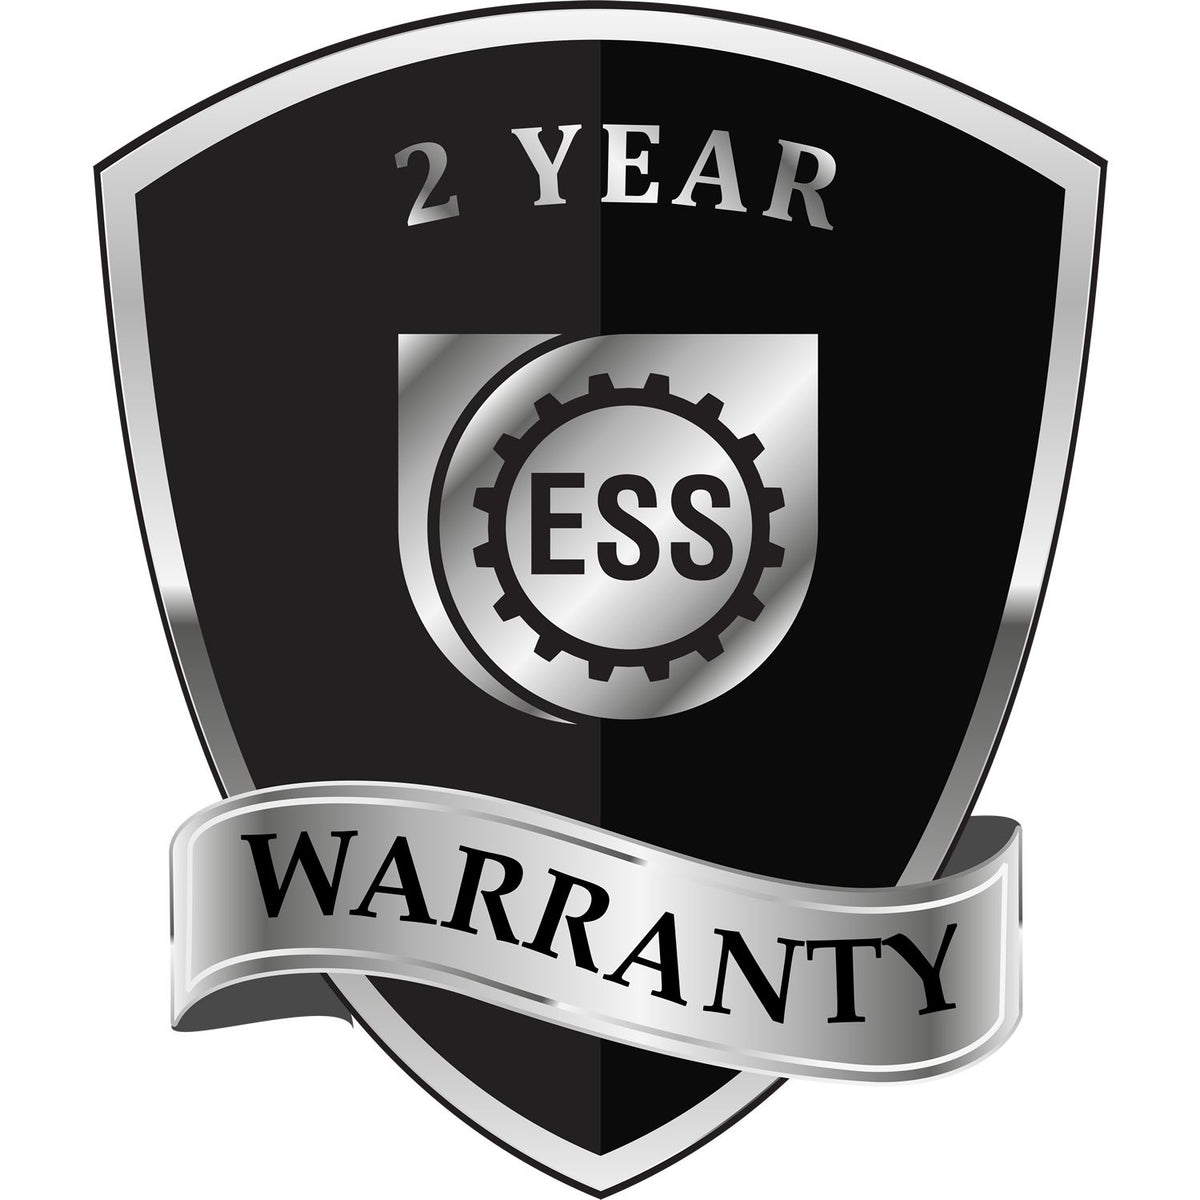 A black and silver badge or emblem showing warranty information for the Heavy Duty Cast Iron New Jersey Geologist Seal Embosser